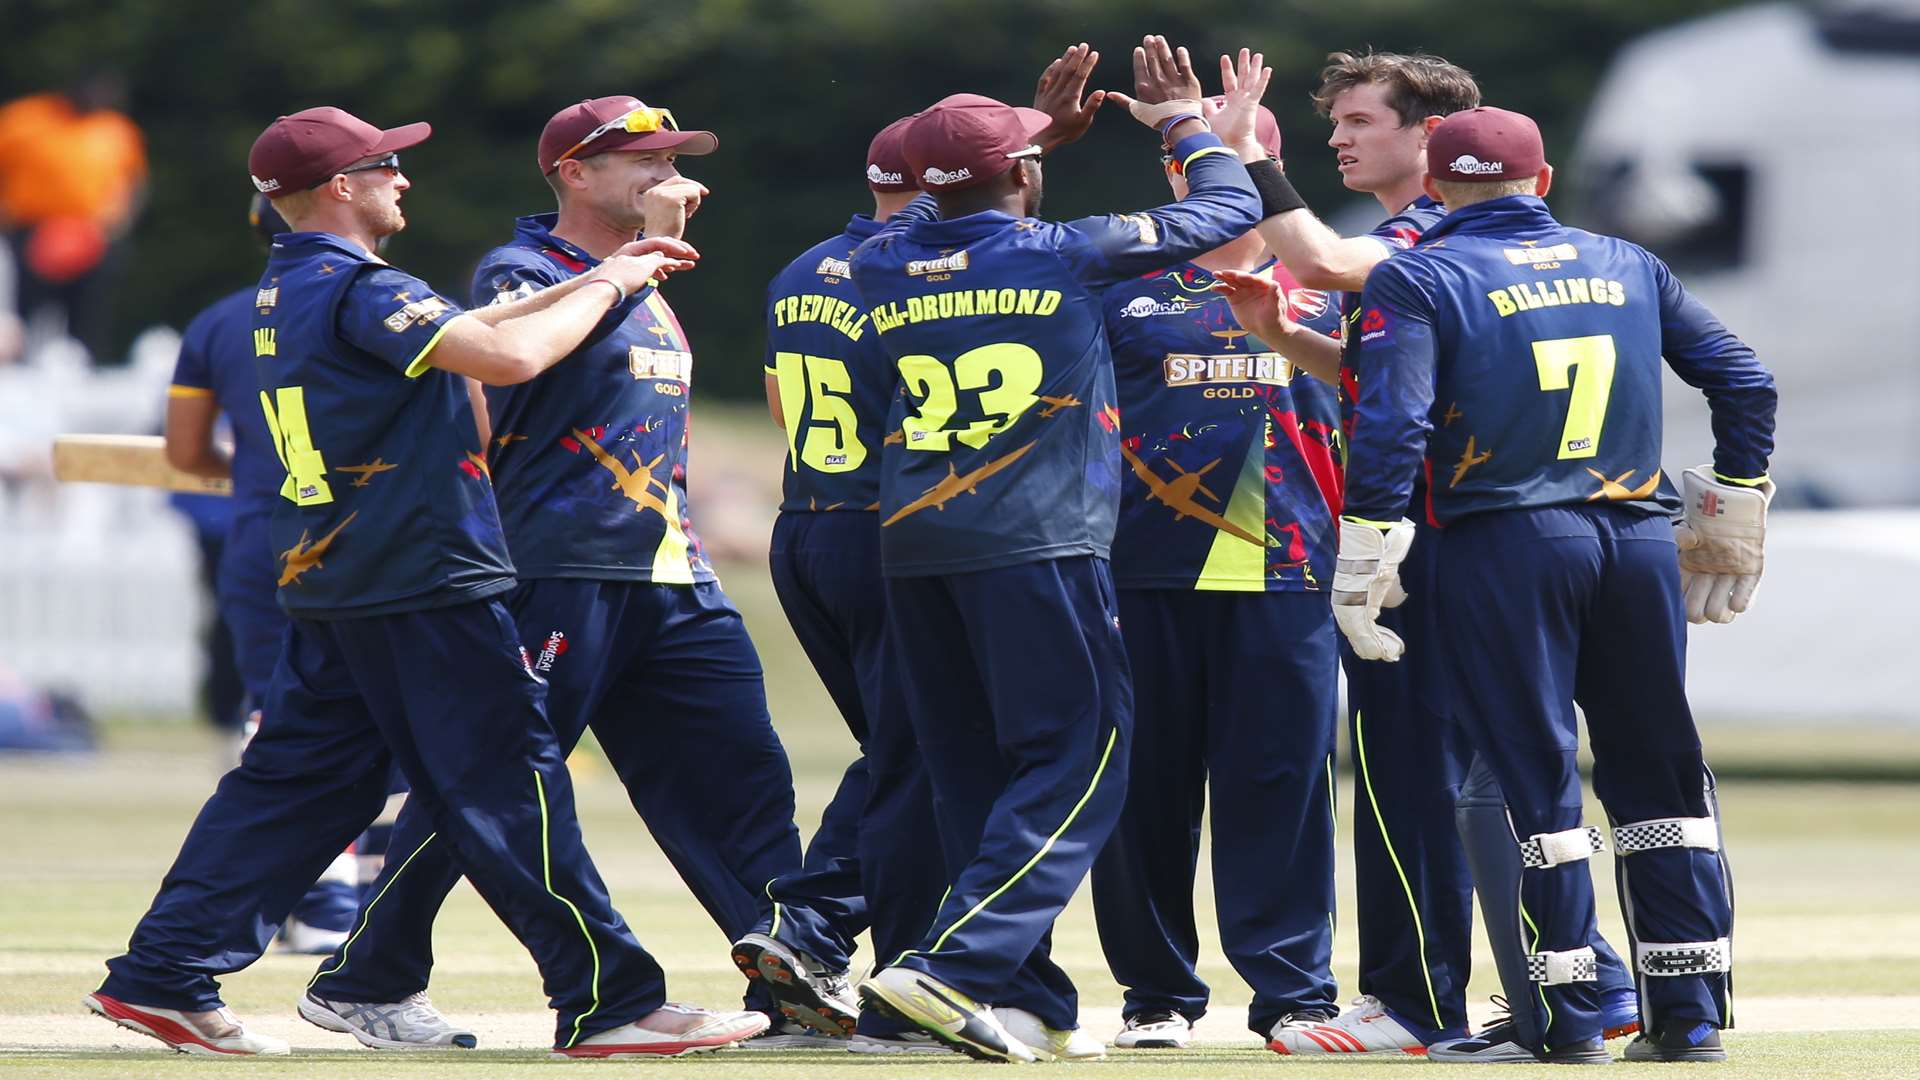 Adam Milne celebrates a wicket for Spitfires against Essex Eagles. Picture: Andy Jones